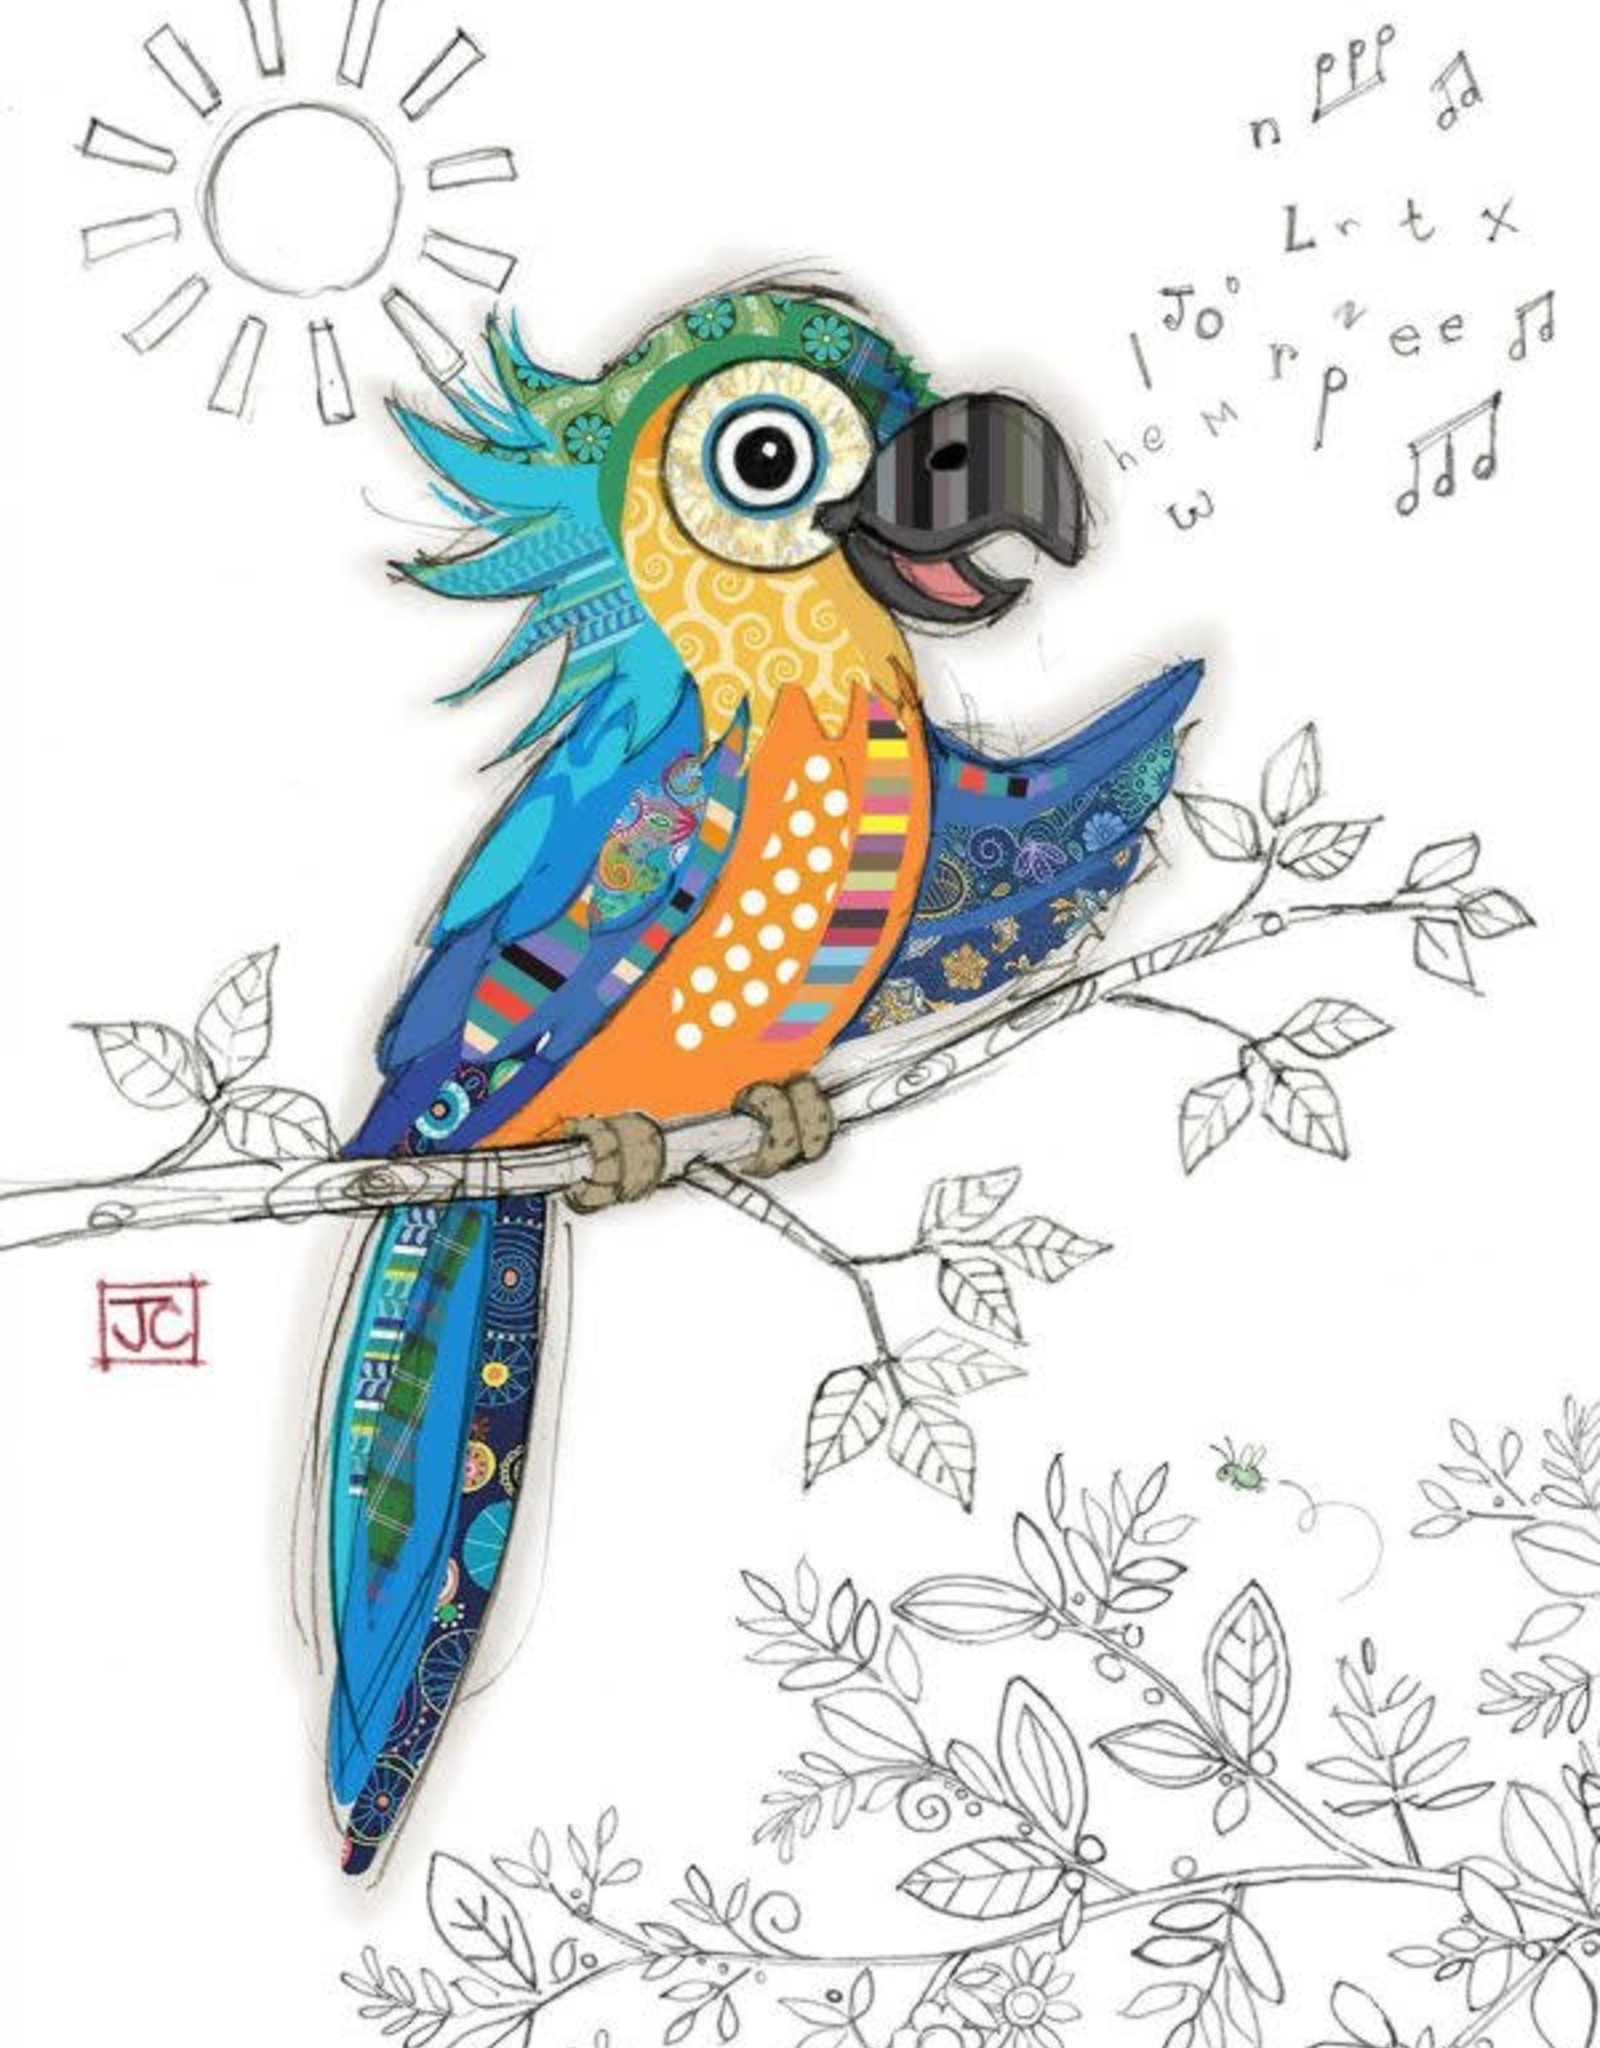 Incognito KOOKS - PARROT - BLANK (5" X 7")